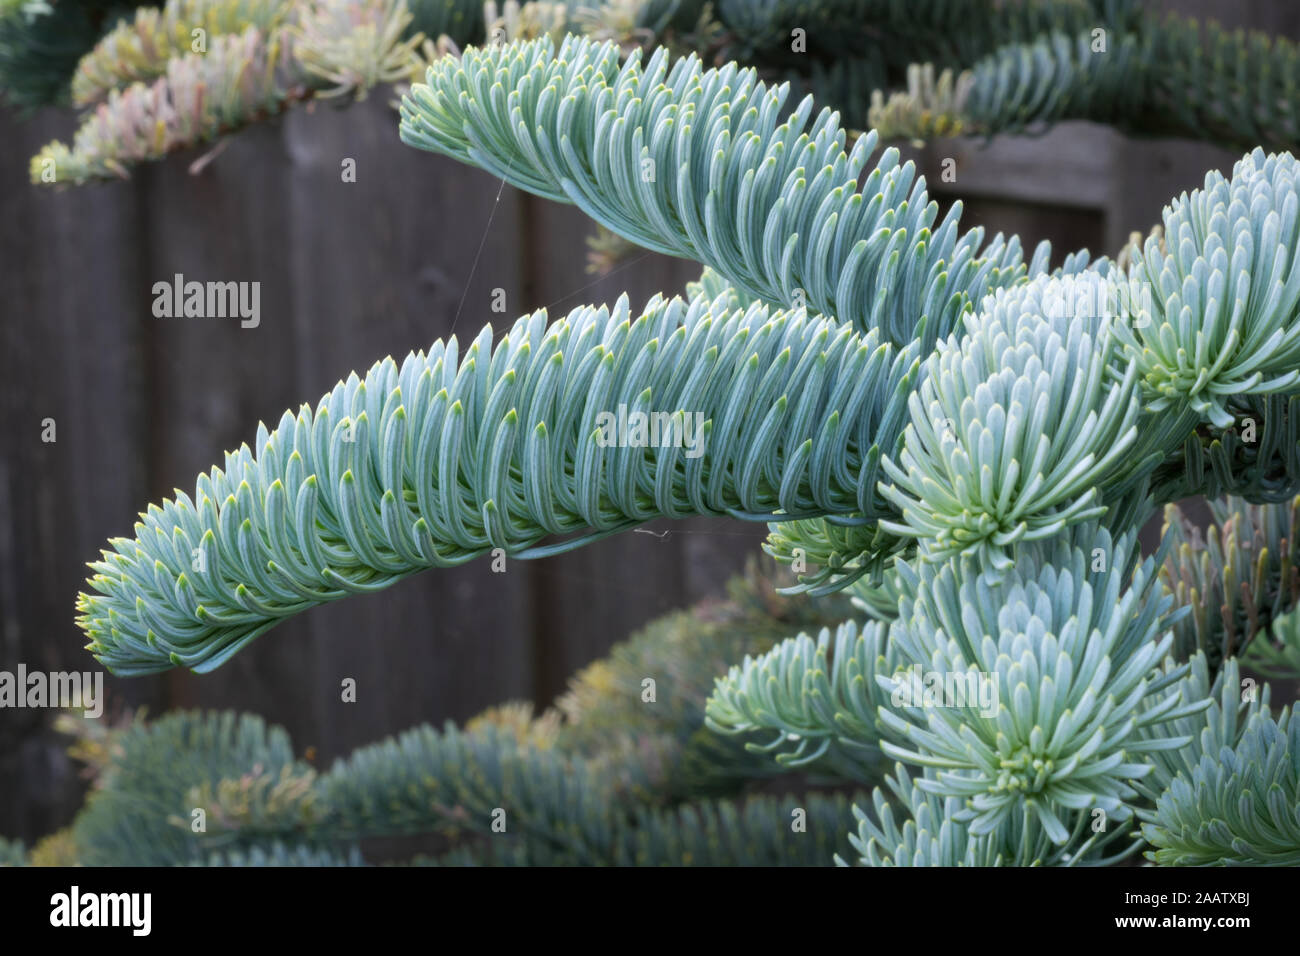 Young shoots of Abies procera glauca (Noble fir) in spring in a botanical garden. Beautiful soft blue silvery colored needles. Stock Photo